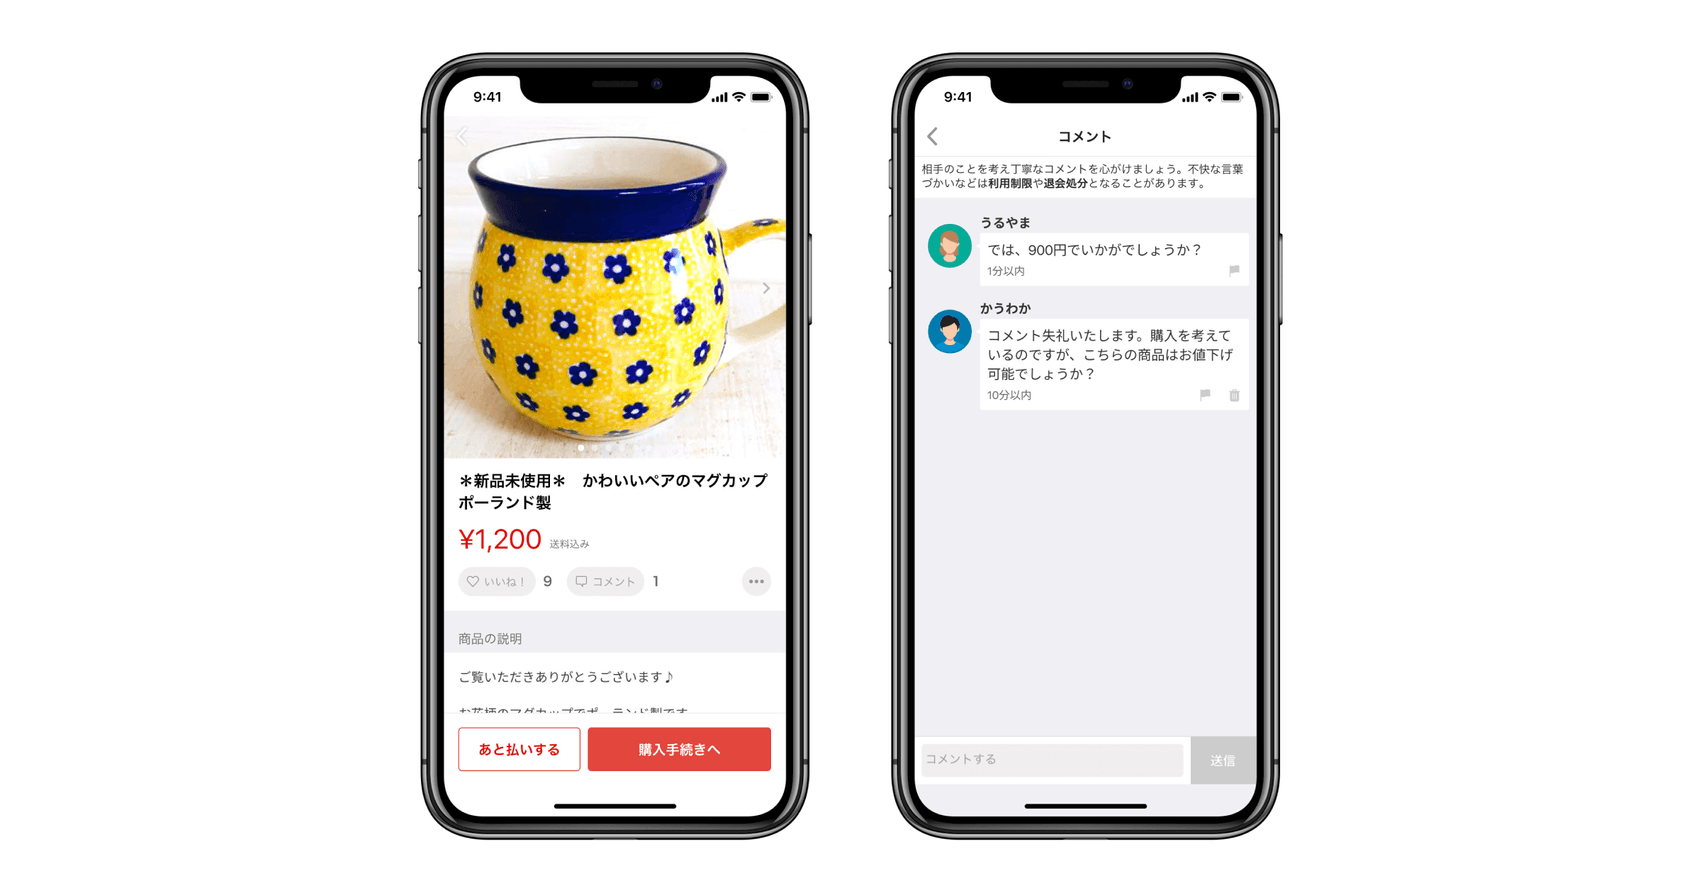 Starting to Provide Listing Data From the Mercari Marketplace App for Free to Universities and Other Organizations ~Aiming to Contribute to Creation of a Circular Economy Through Analysis of Consumer Behavior and Psychology and Other Research in the Secondary C2C Distribution Market~